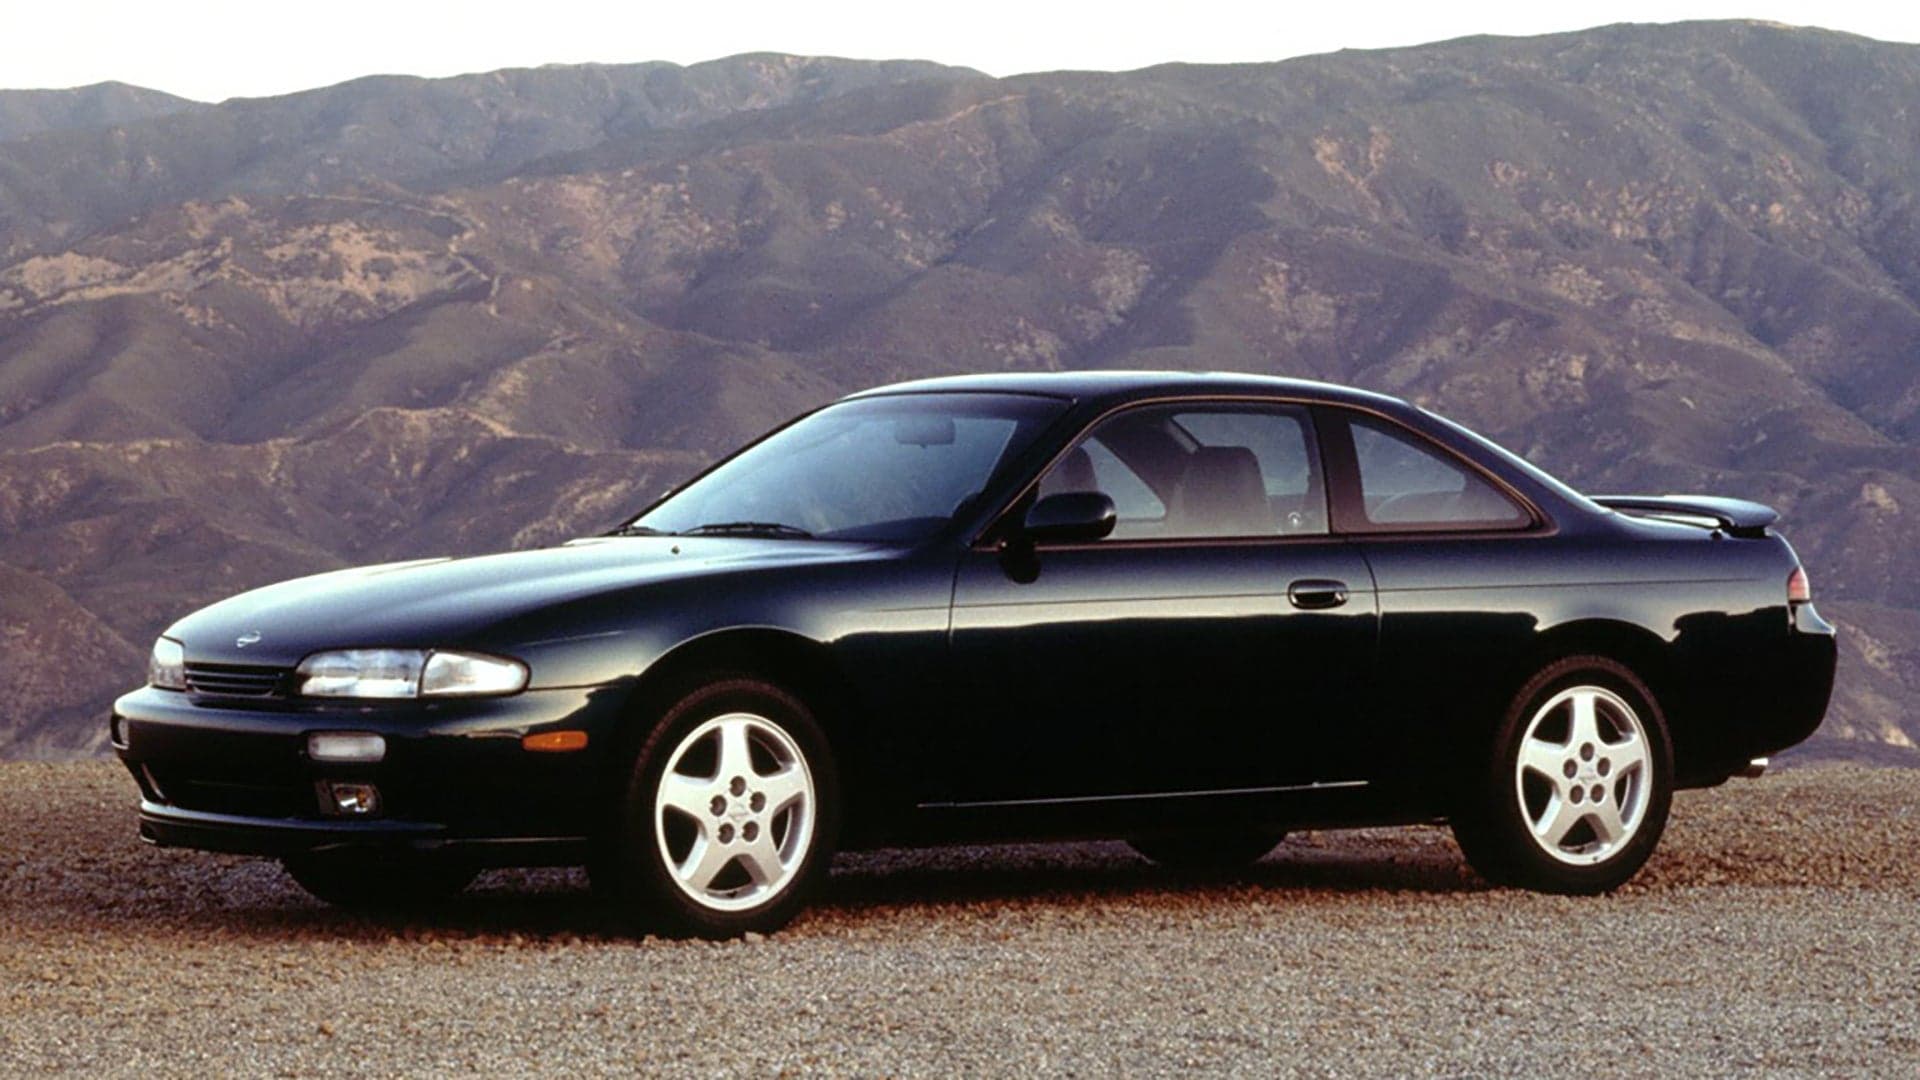 Before It Was a Drift Missile, the 1995 Nissan 240SX Was Aimed at Single Professional Women